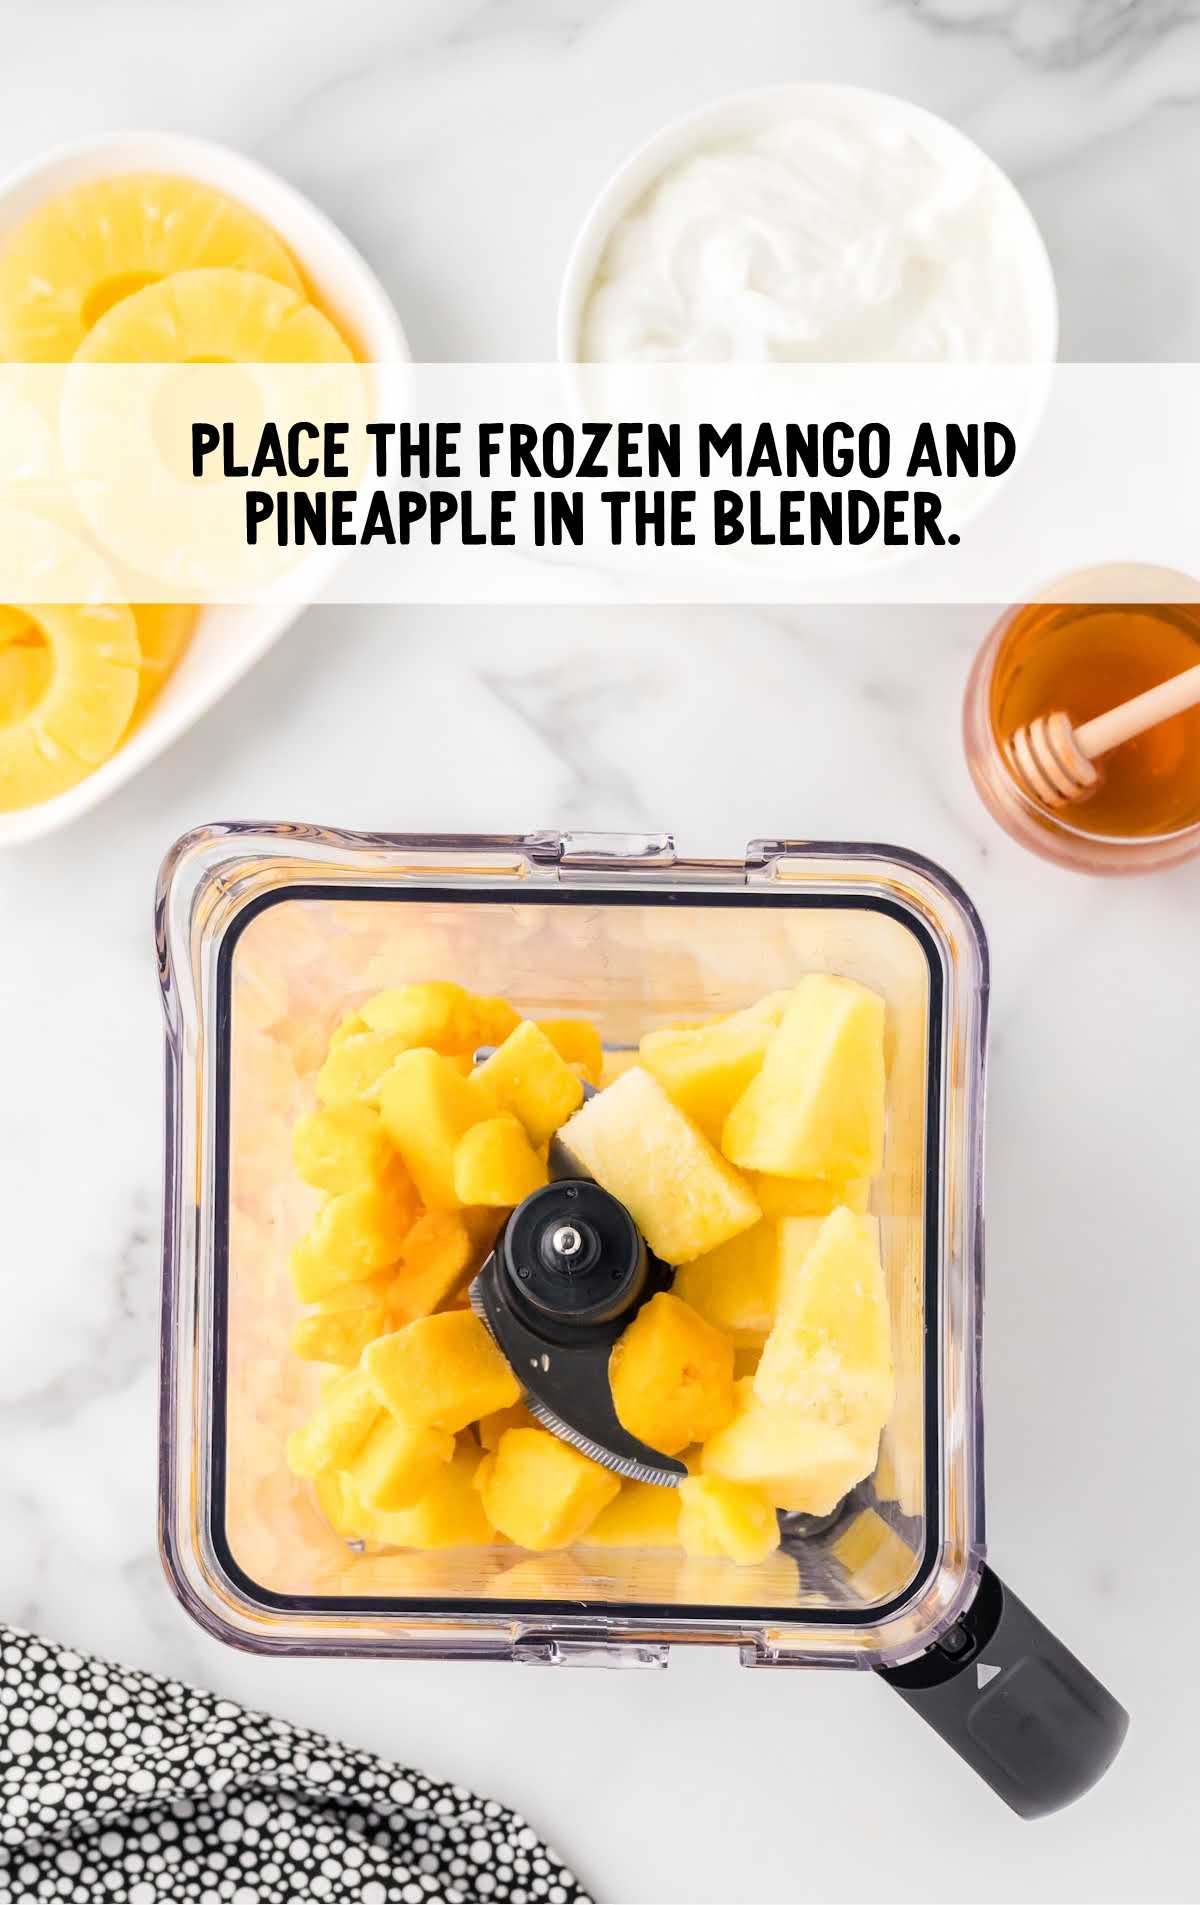 mango and pineapple placed in a blended